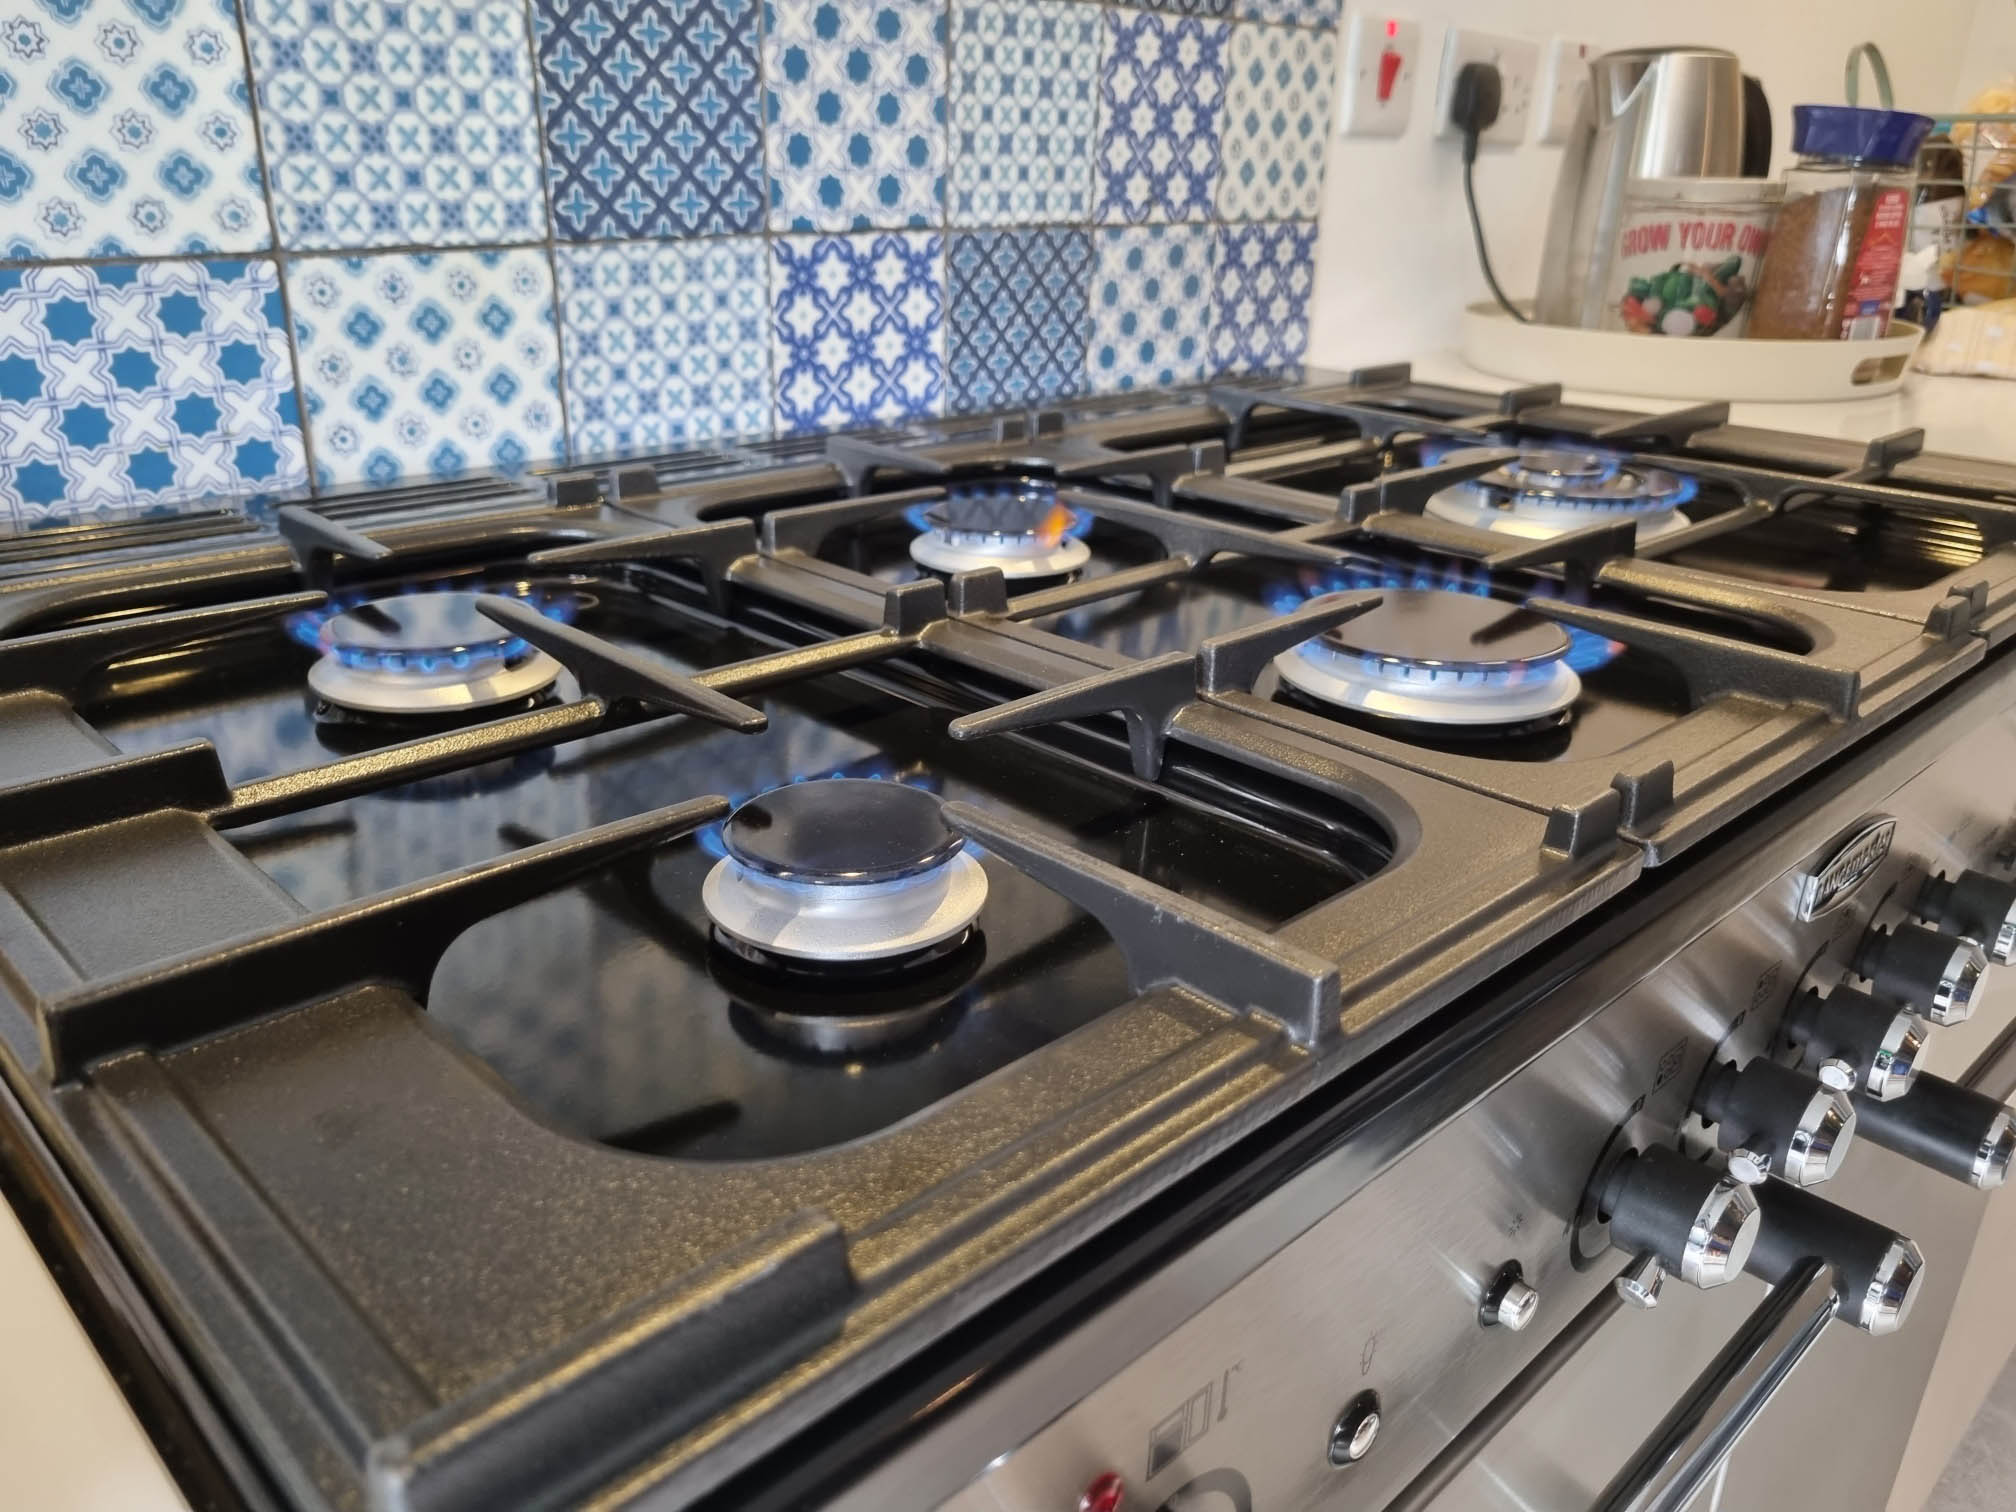 Clean Stove top | Clean Oven Belfast | Oven Cleaning NI | Oven Clean ni | Kitchen Cleaning NI | Oven Cleaning Belfast | Kitchen Appliance Cleaning Belfast | Oven Clean NI